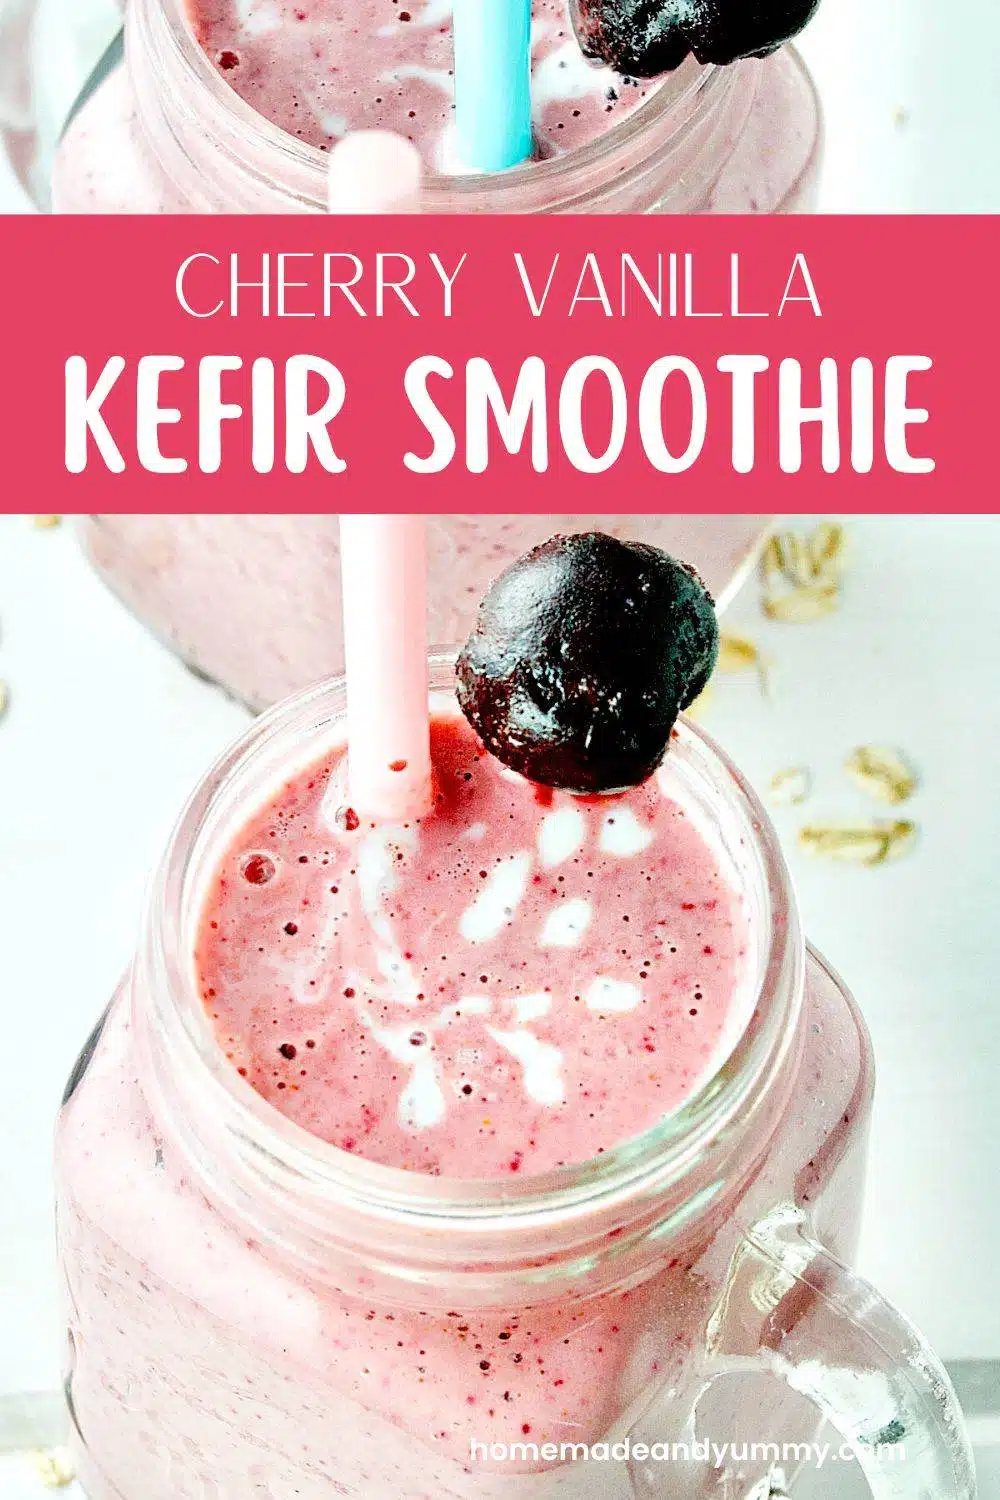 Vanilla kefir smoothie made with cherries and figs.